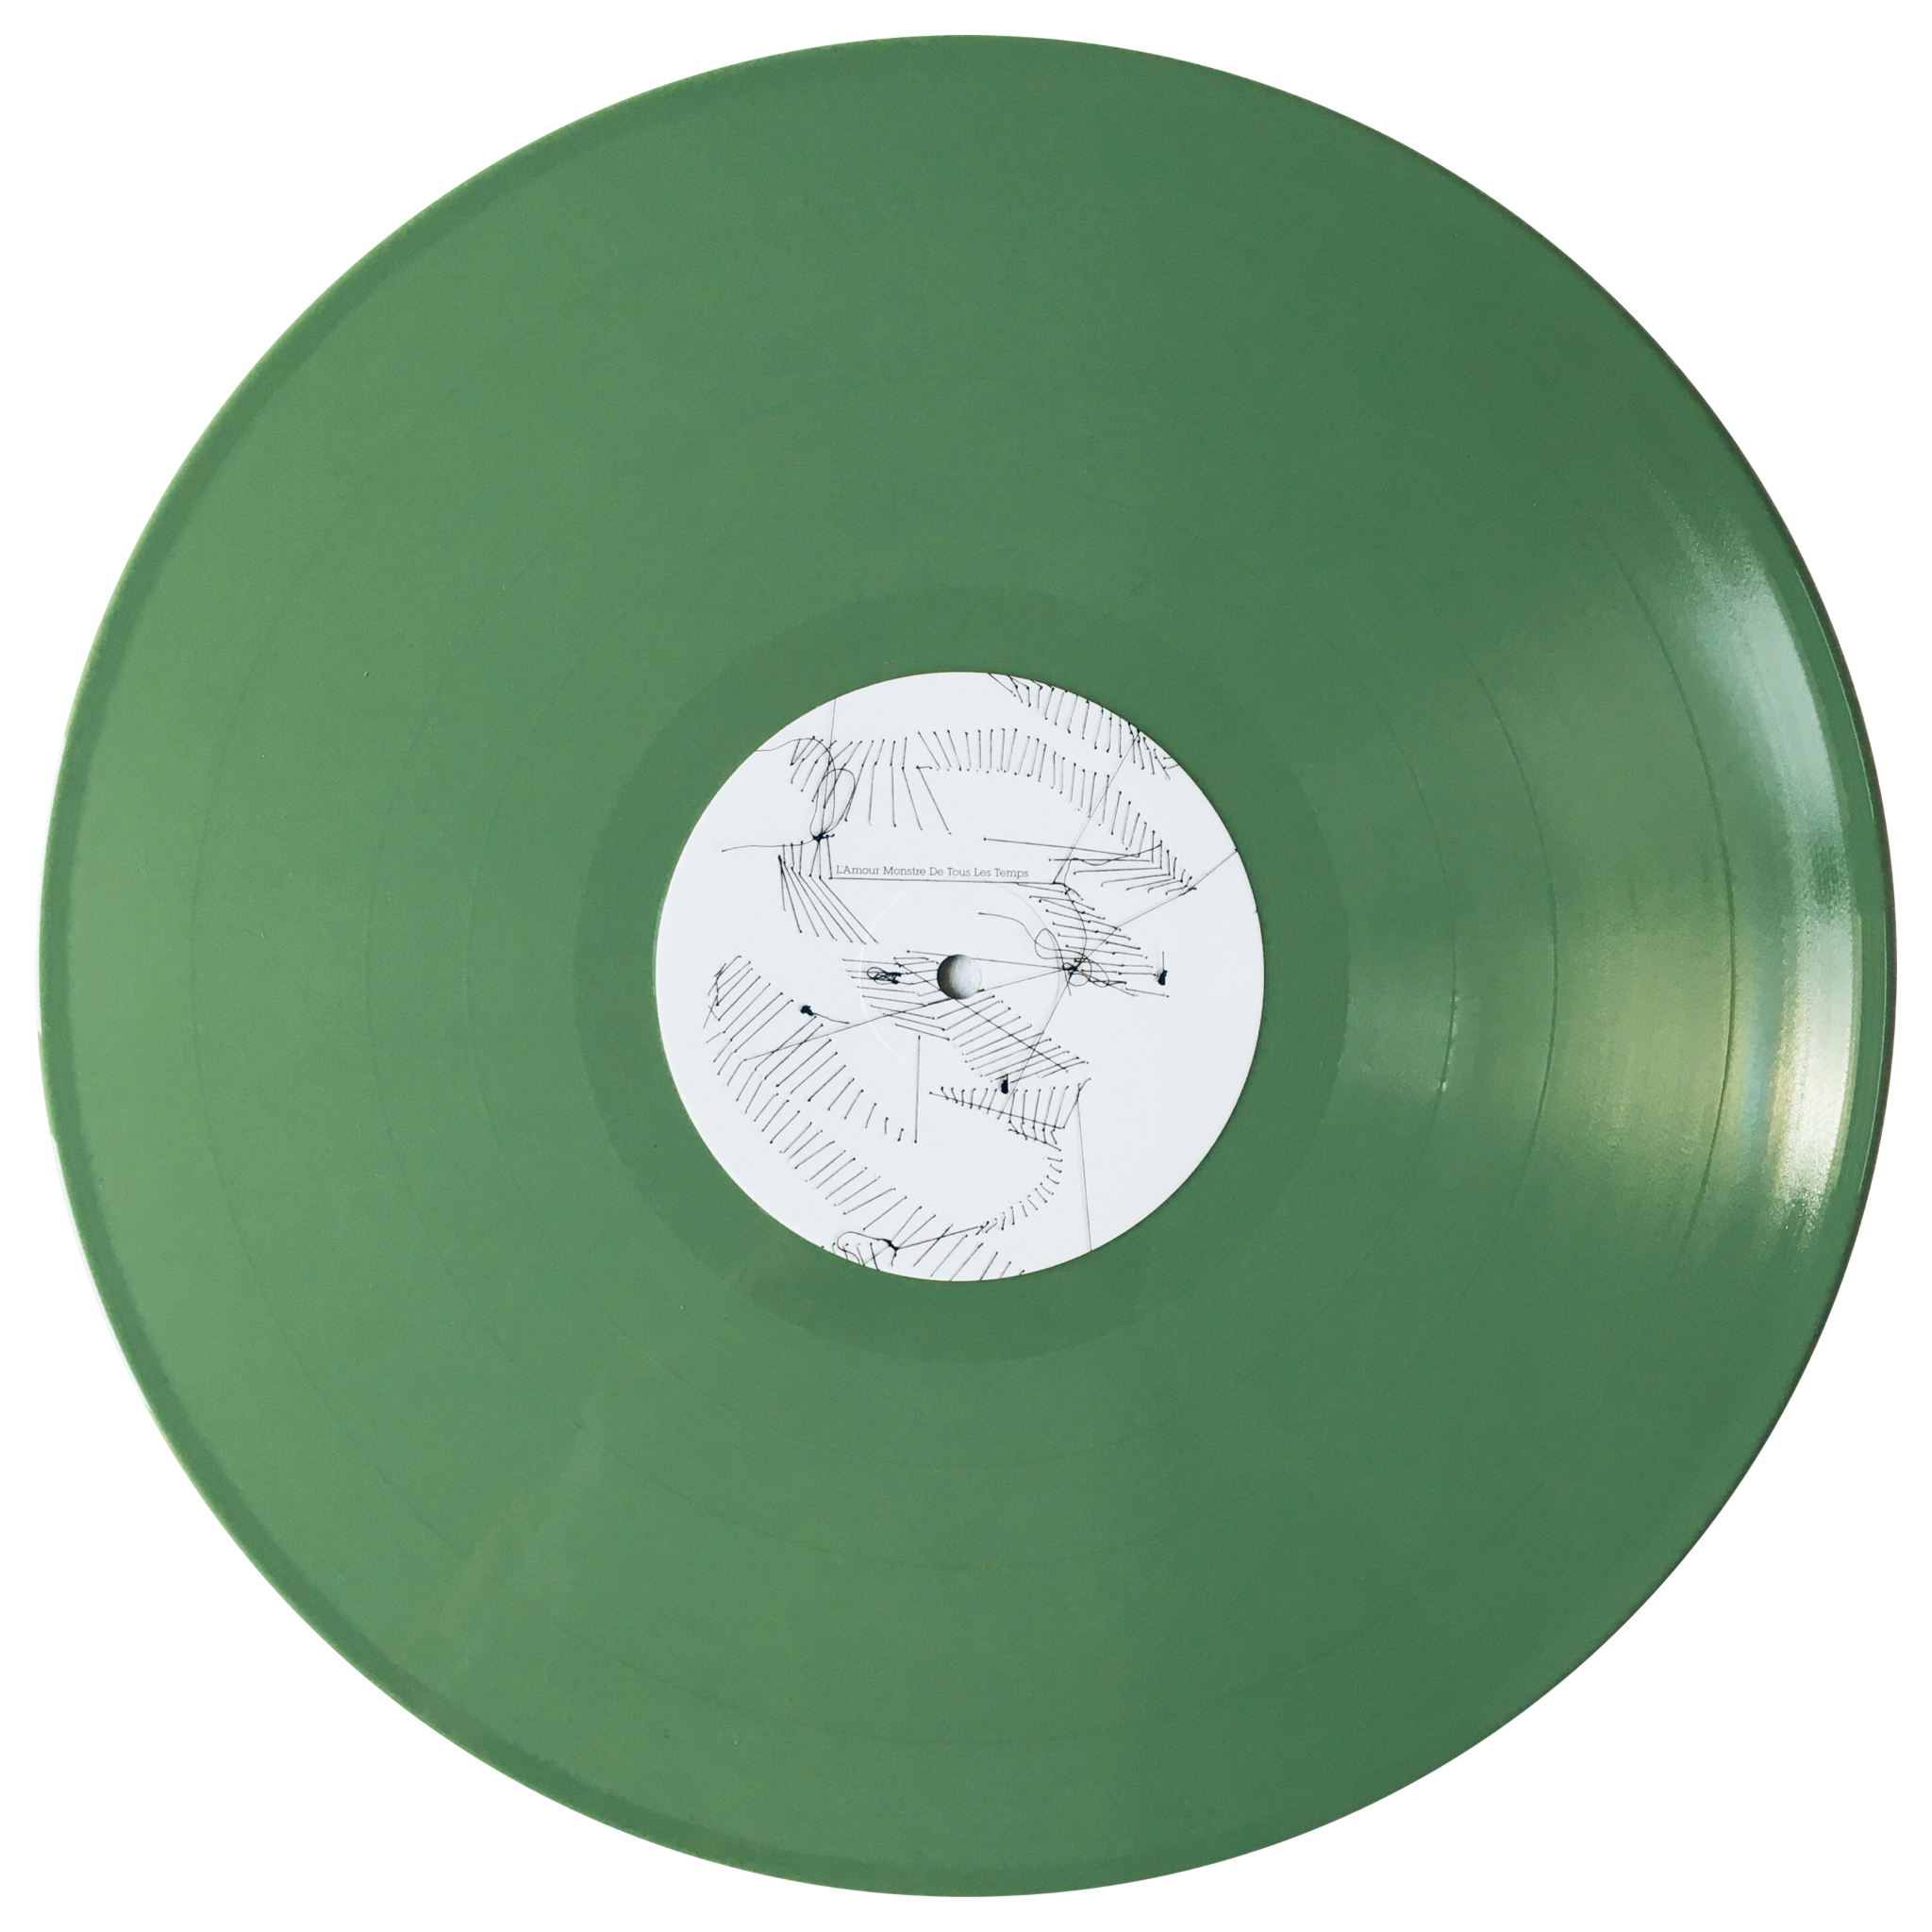 JULIE'S HAIRCUT In The Silence Electric (Ltd Green vinyl edition) –  Rawvibes Records